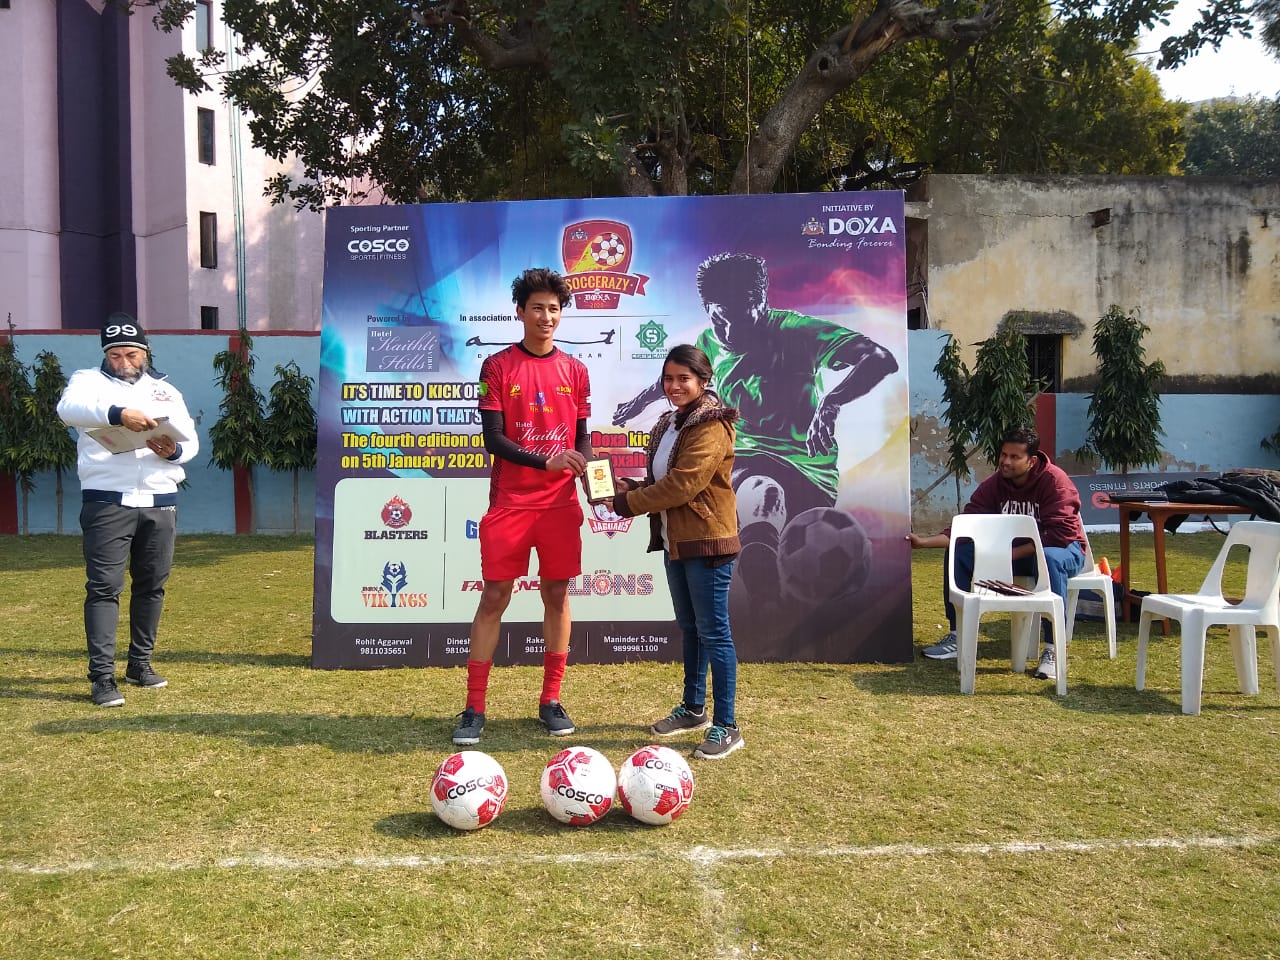 Soccerazy kicks off 4th Edition - Day 4 - 26th Jan, 2020<br>
<br>
Day 4 of the action packed league..<br>
<br>
Guaranteed excitement on & off the field!